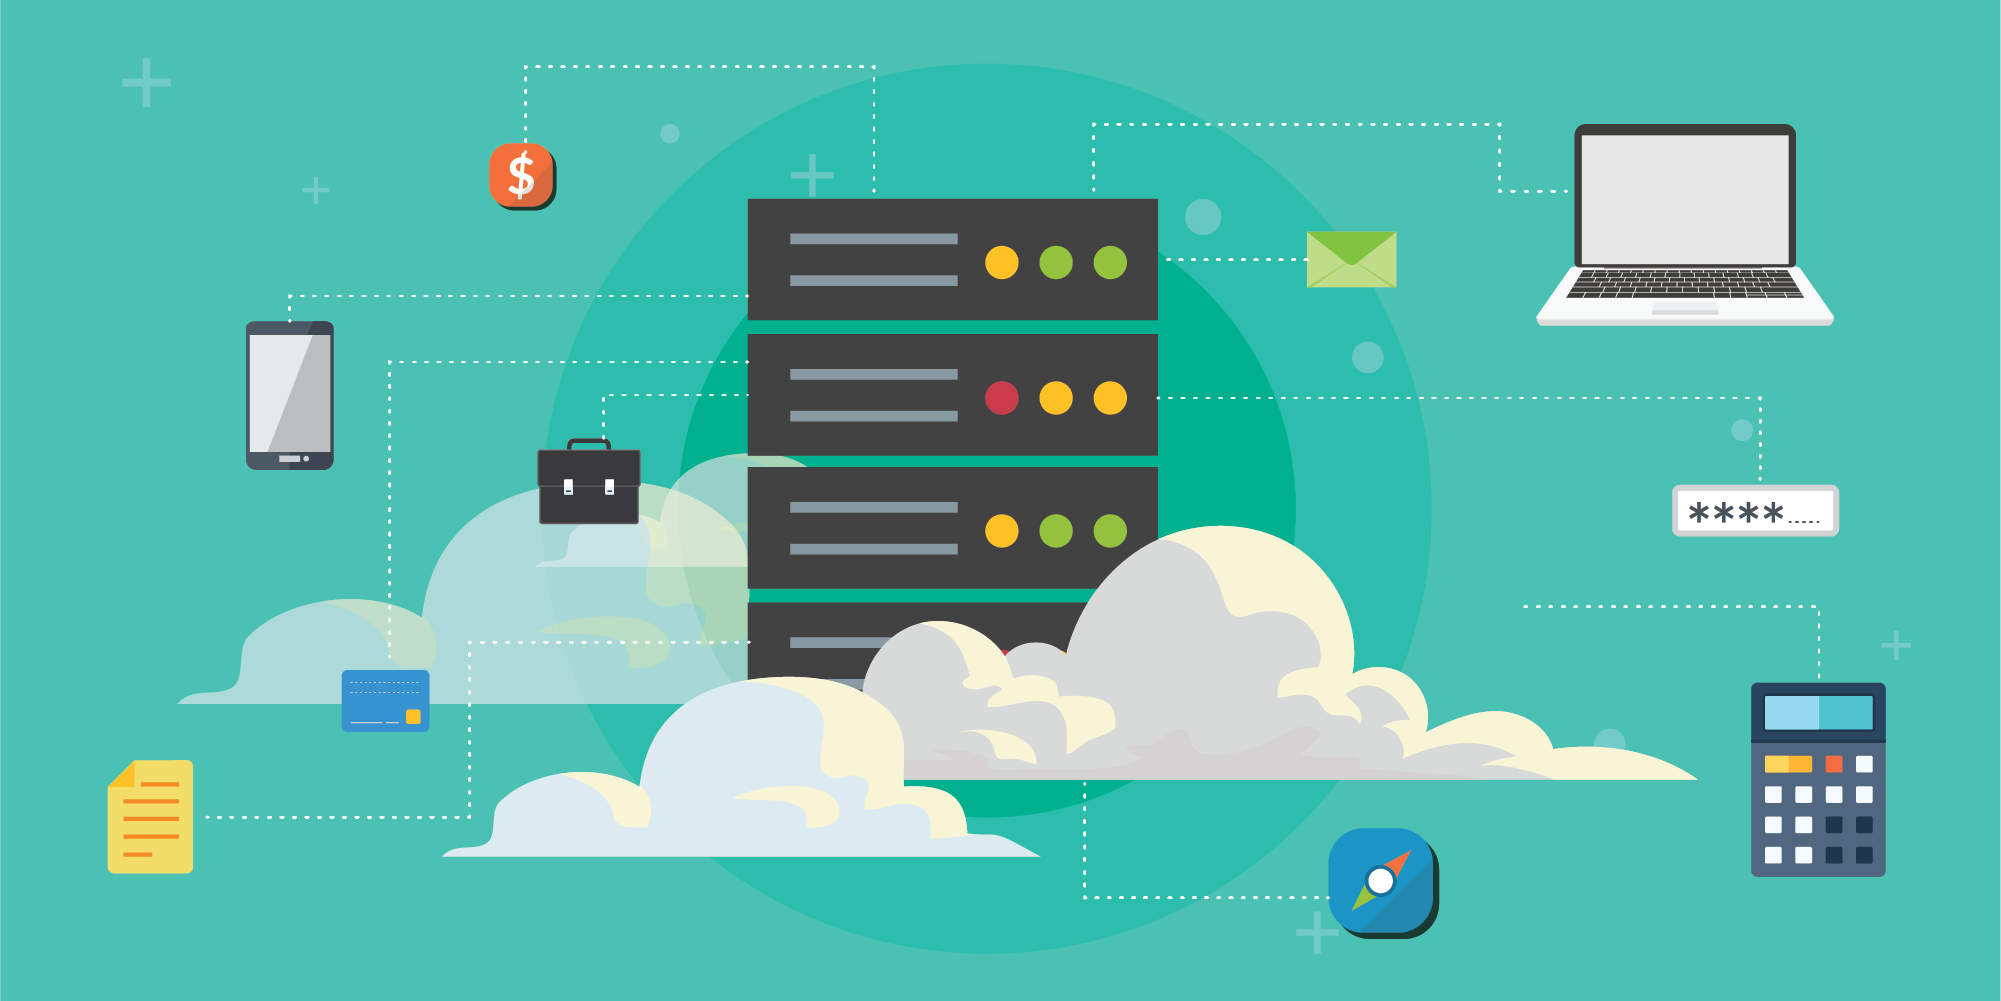 A pictorial representation of a vulnerability such as lateral movement techniques in cloud environments. A server atop a cloud, surrounded by technical tools.